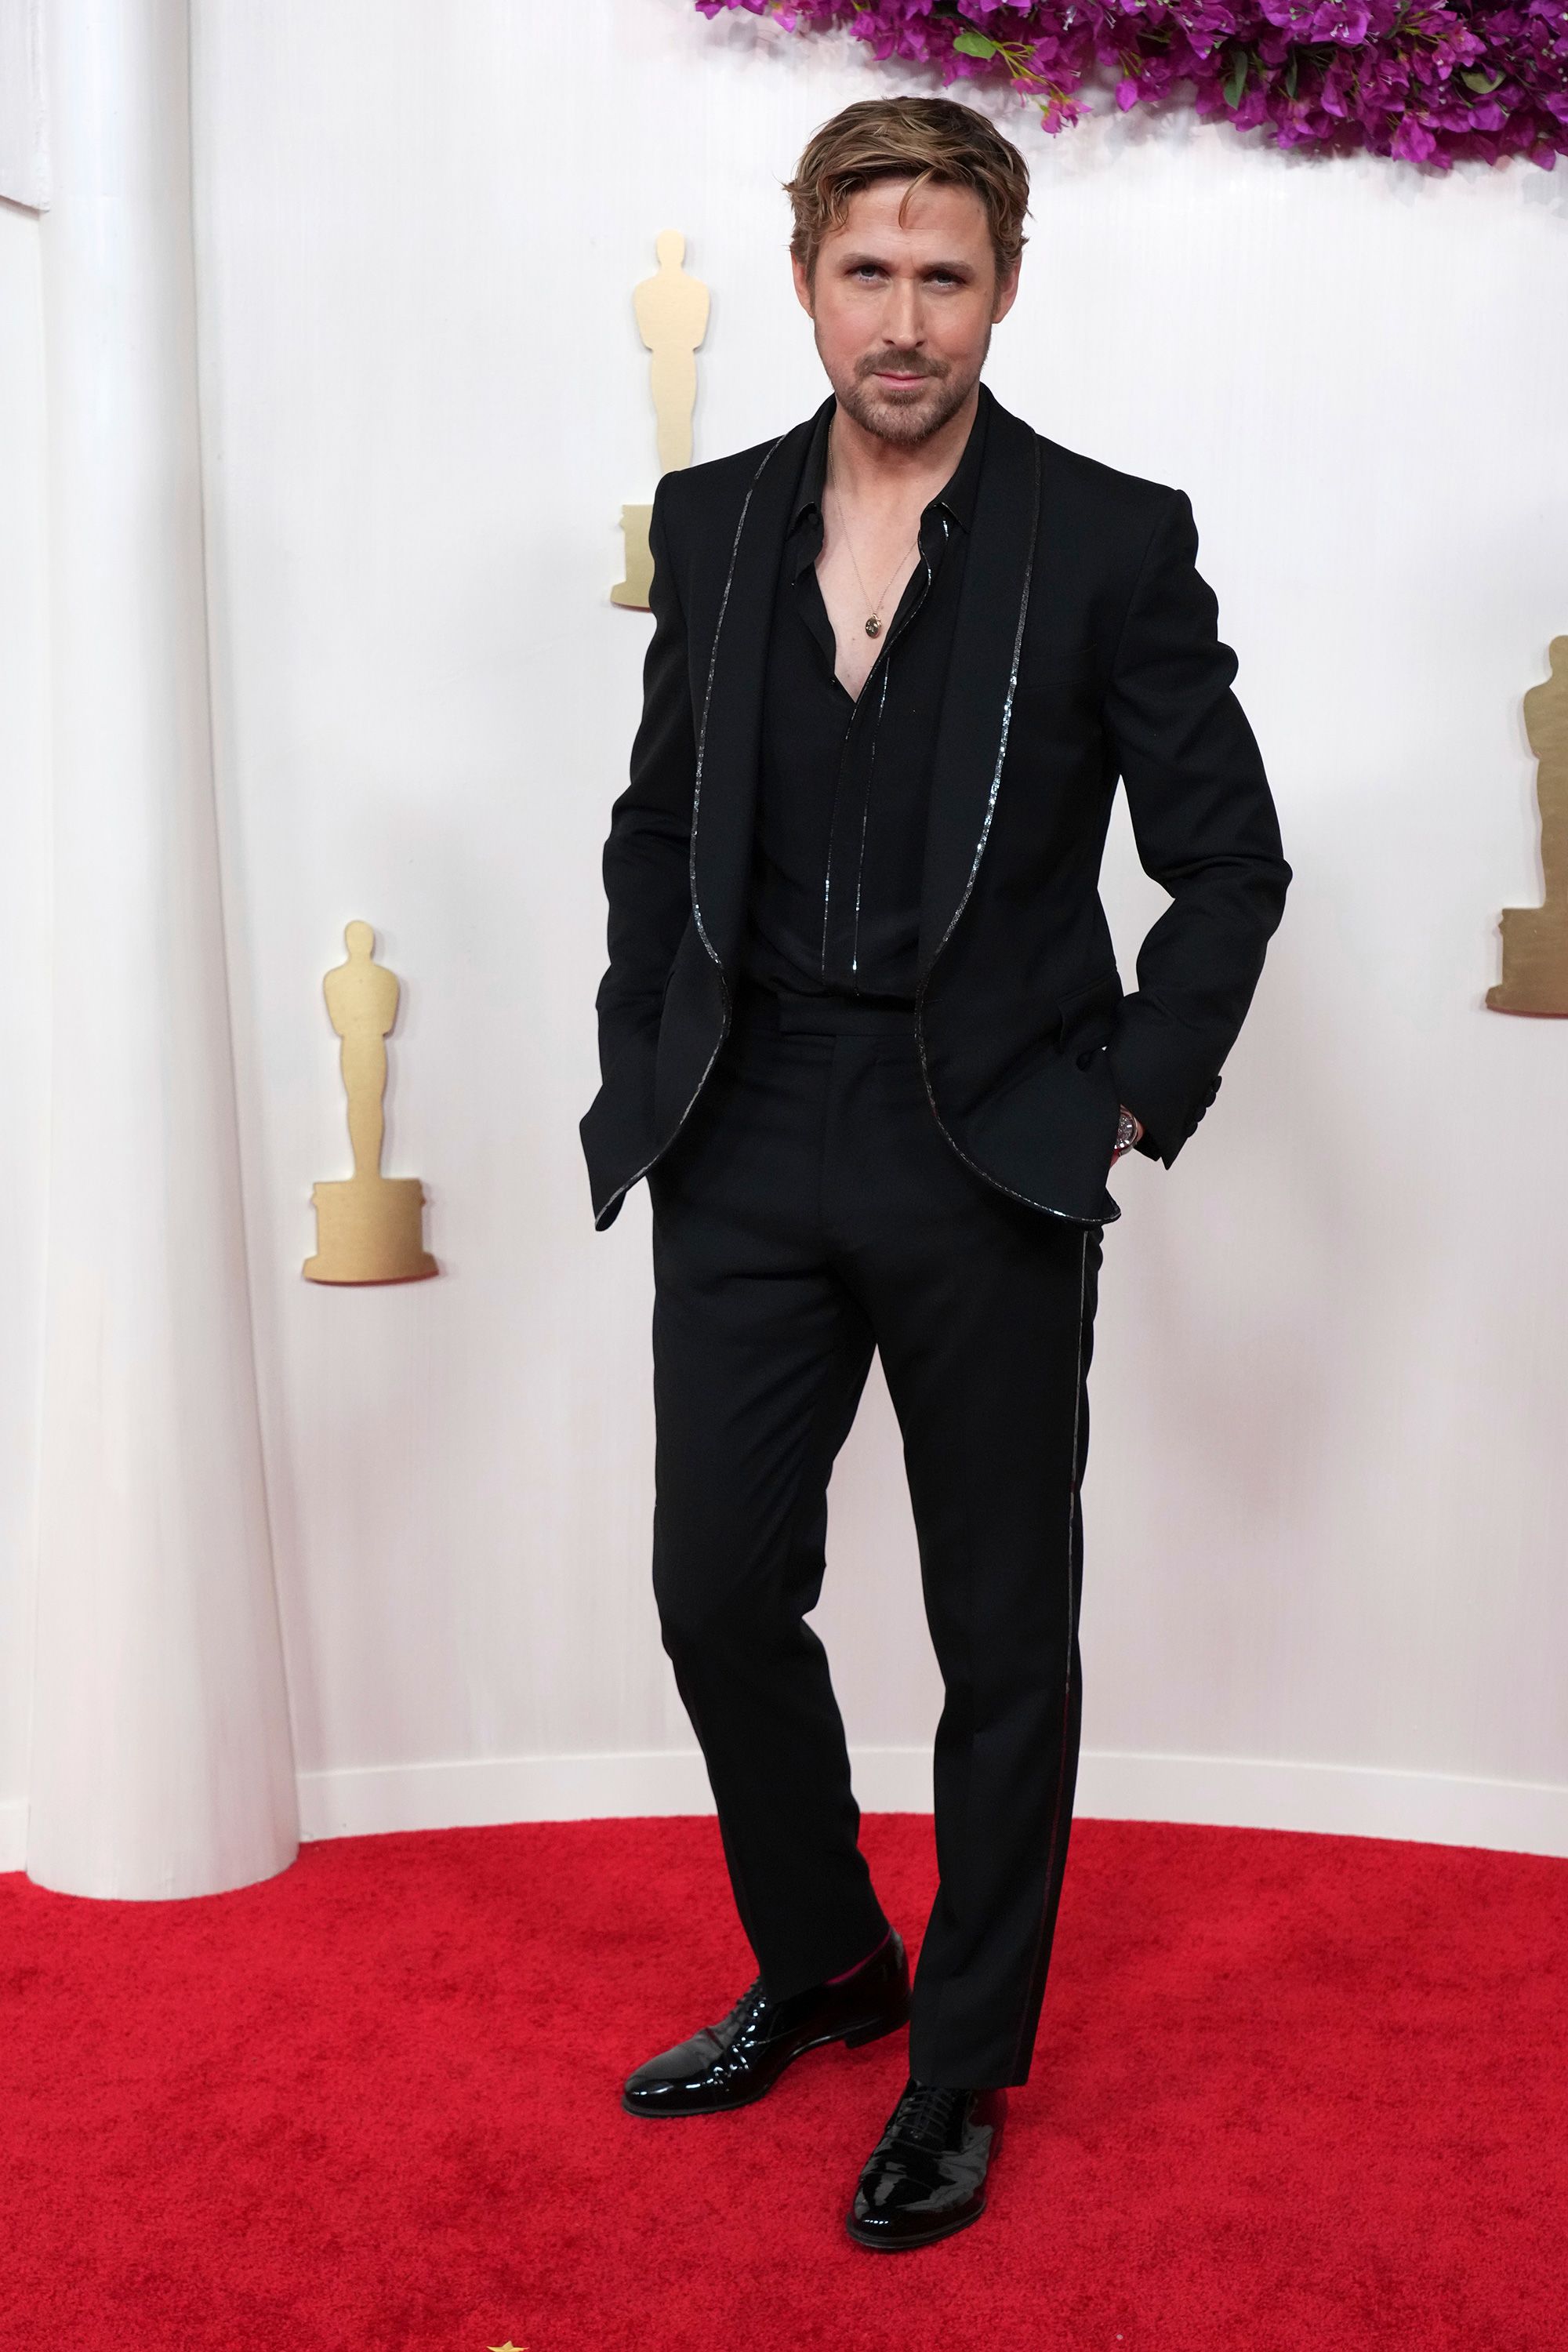 Ryan Gosling, nominated for Best Supporting Actor for his performance in “Barbie,” arrived in a custom Gucci suit lined with silver sequins.